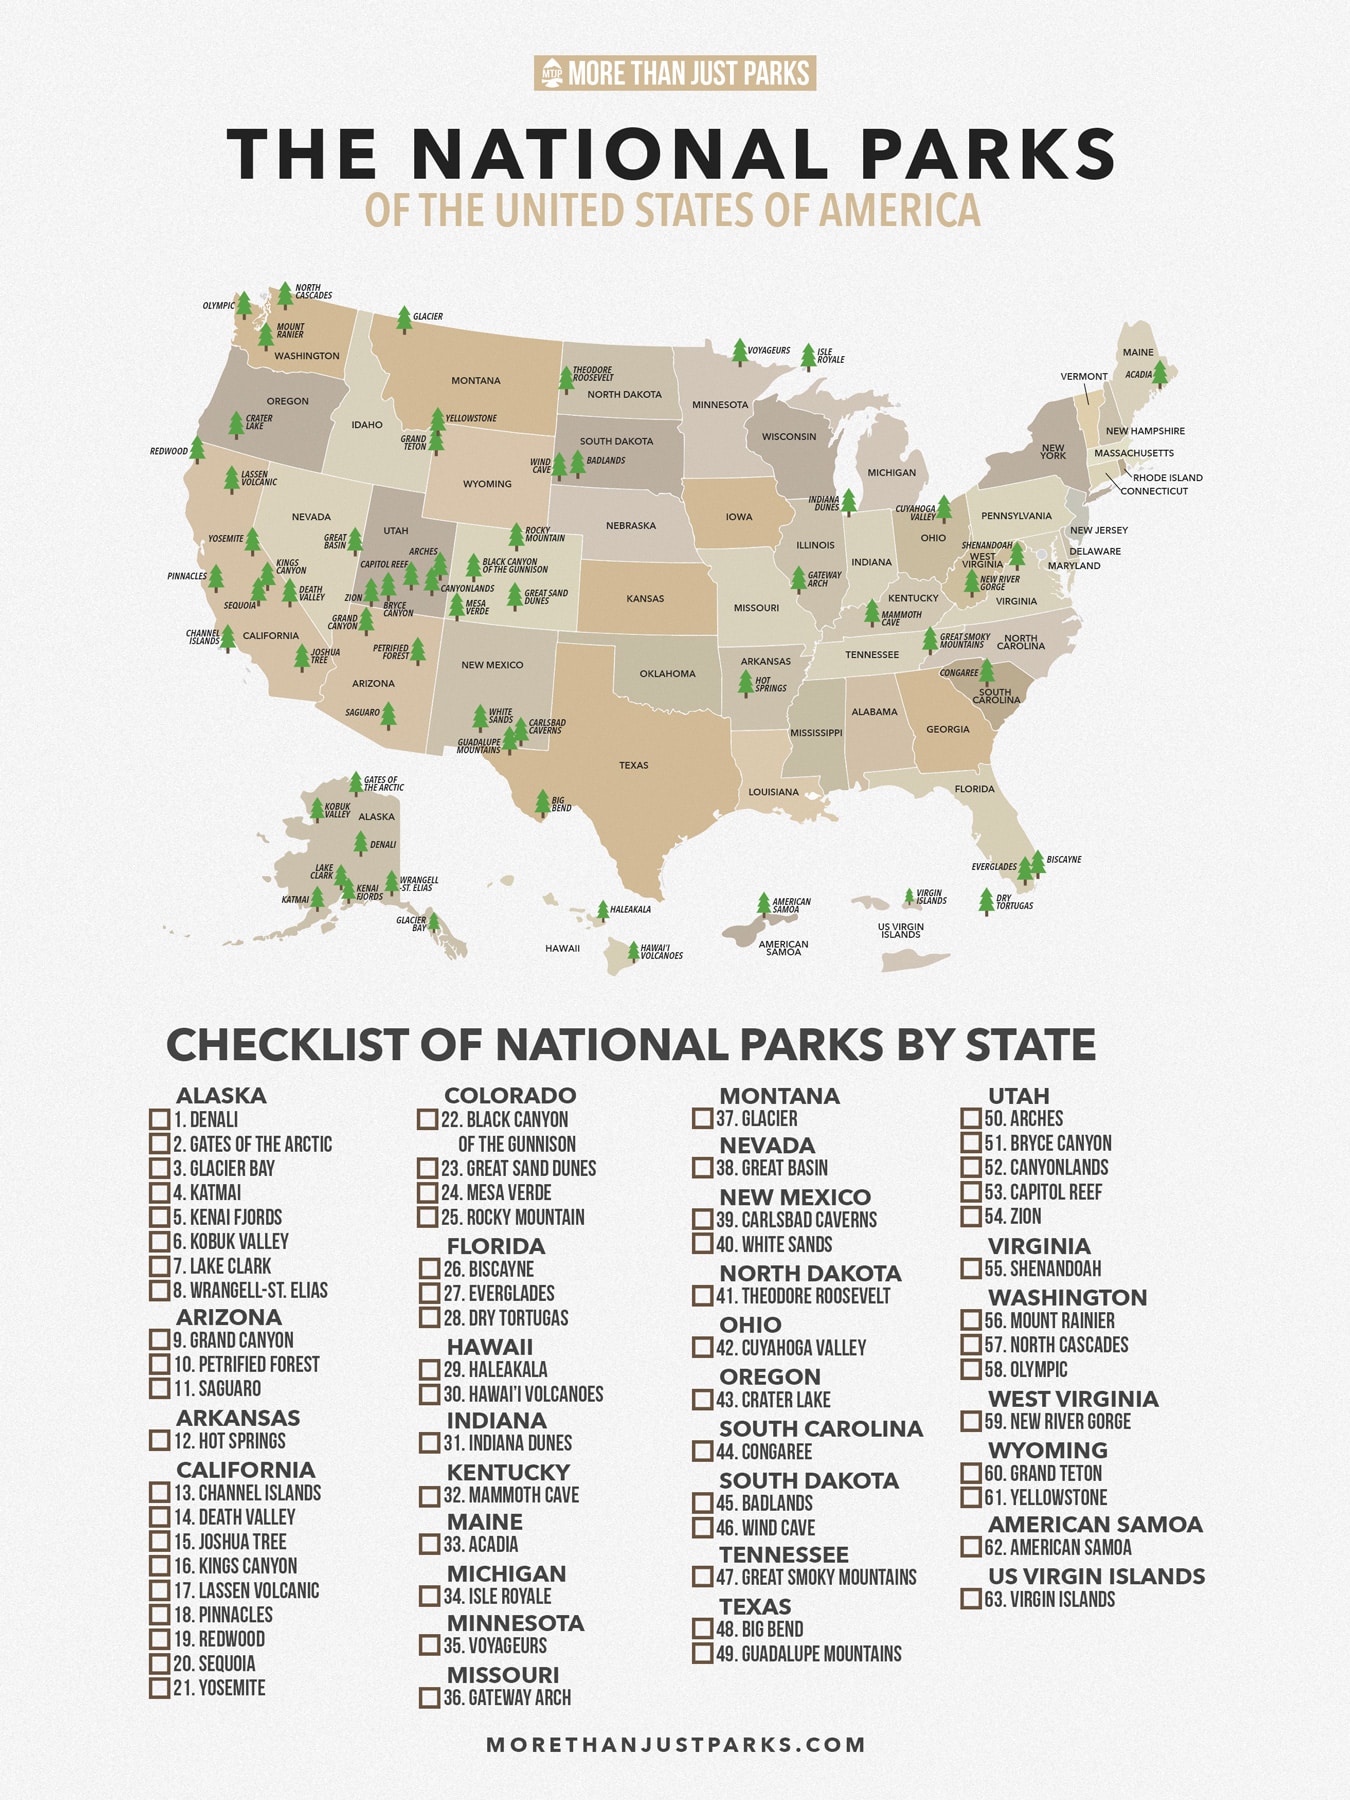 national parks map, national parks checklist, national parks checklist map, list of national parks by state